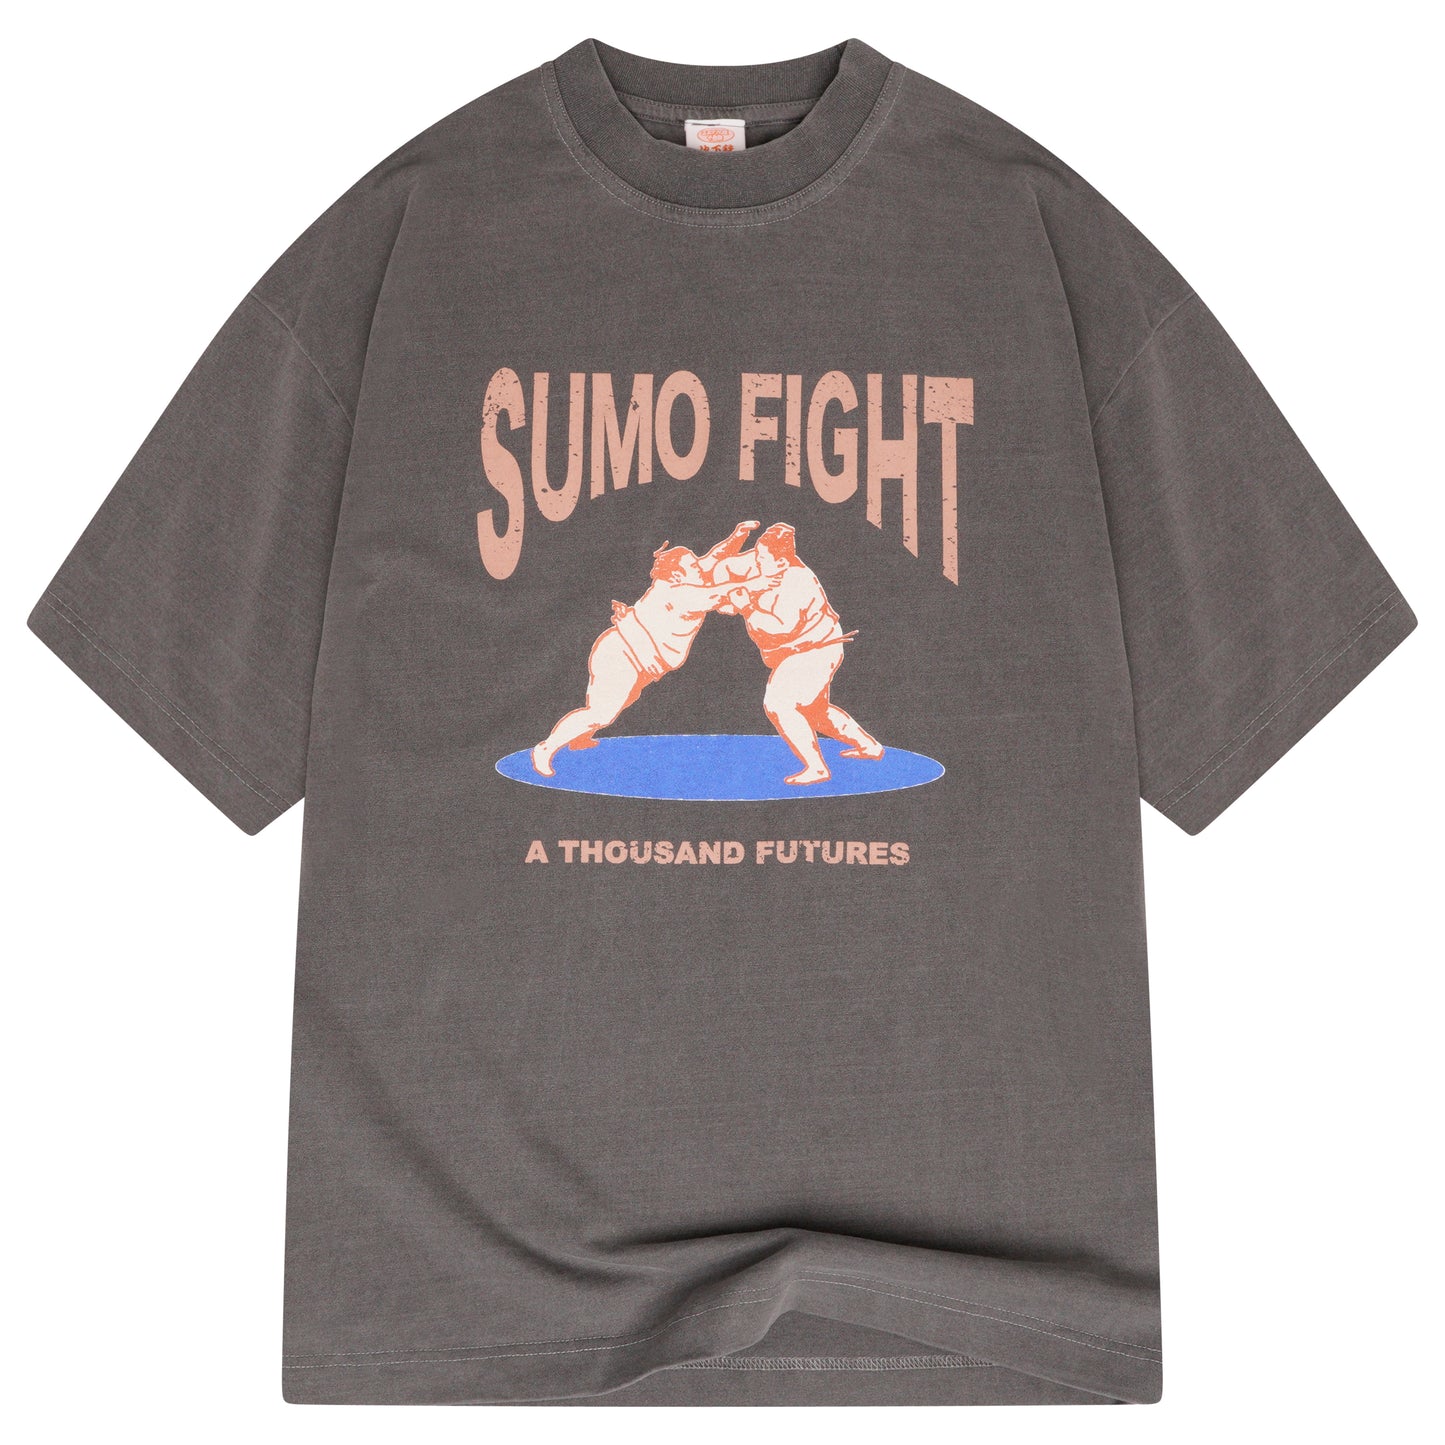 A Thousand Futures 'Sumo Fight' Vintage Washed Tee - Charcoal